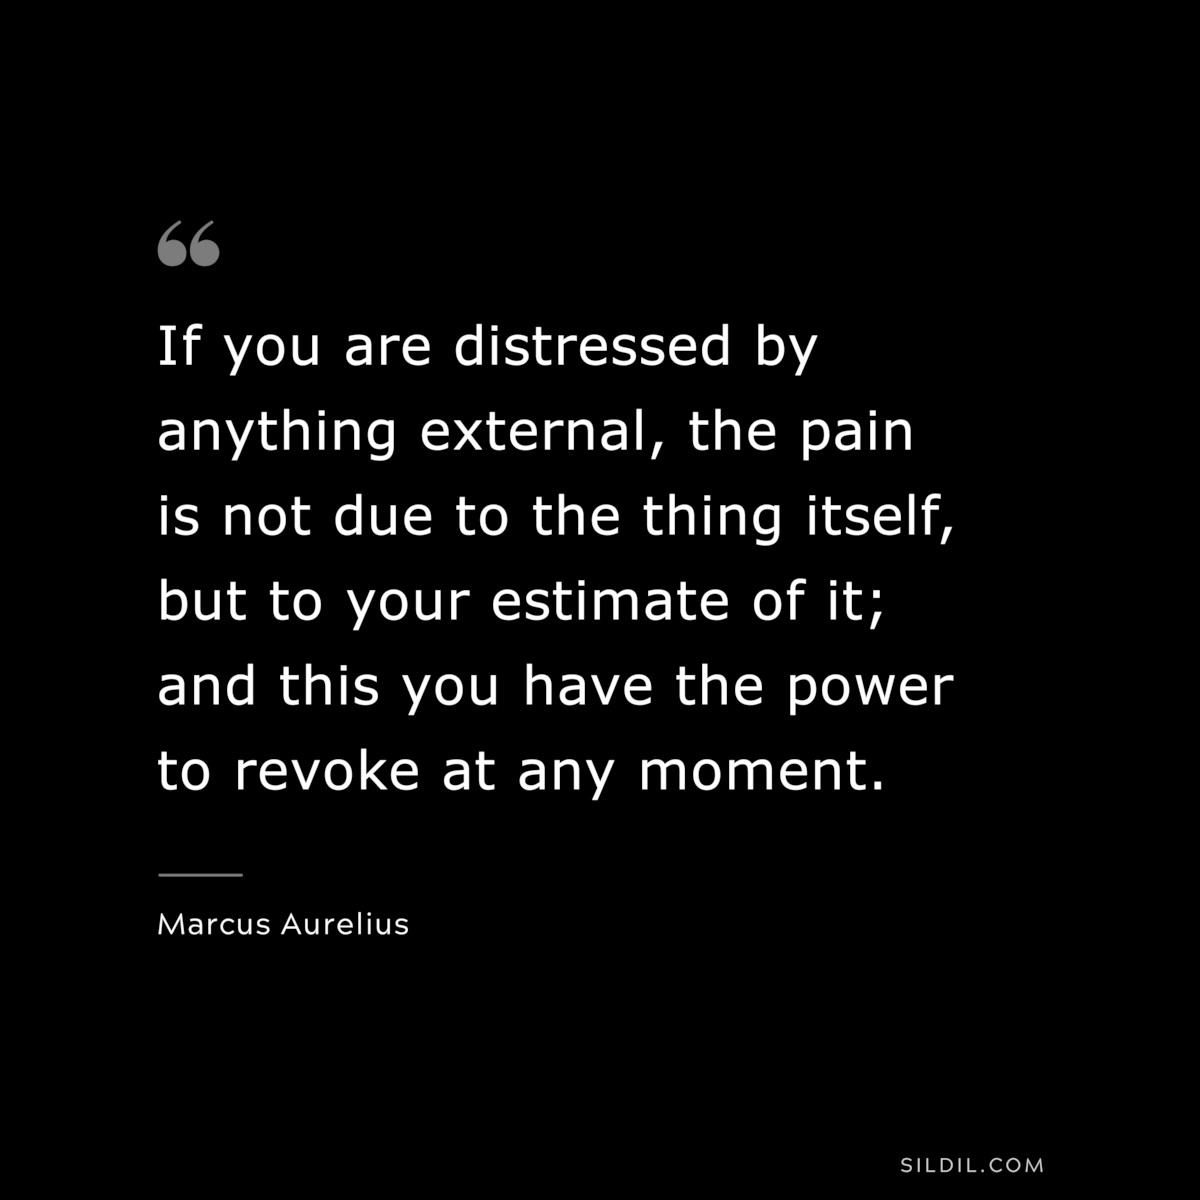 If you are distressed by anything external, the pain is not due to the thing itself, but to your estimate of it; and this you have the power to revoke at any moment. ― Marcus Aurelius